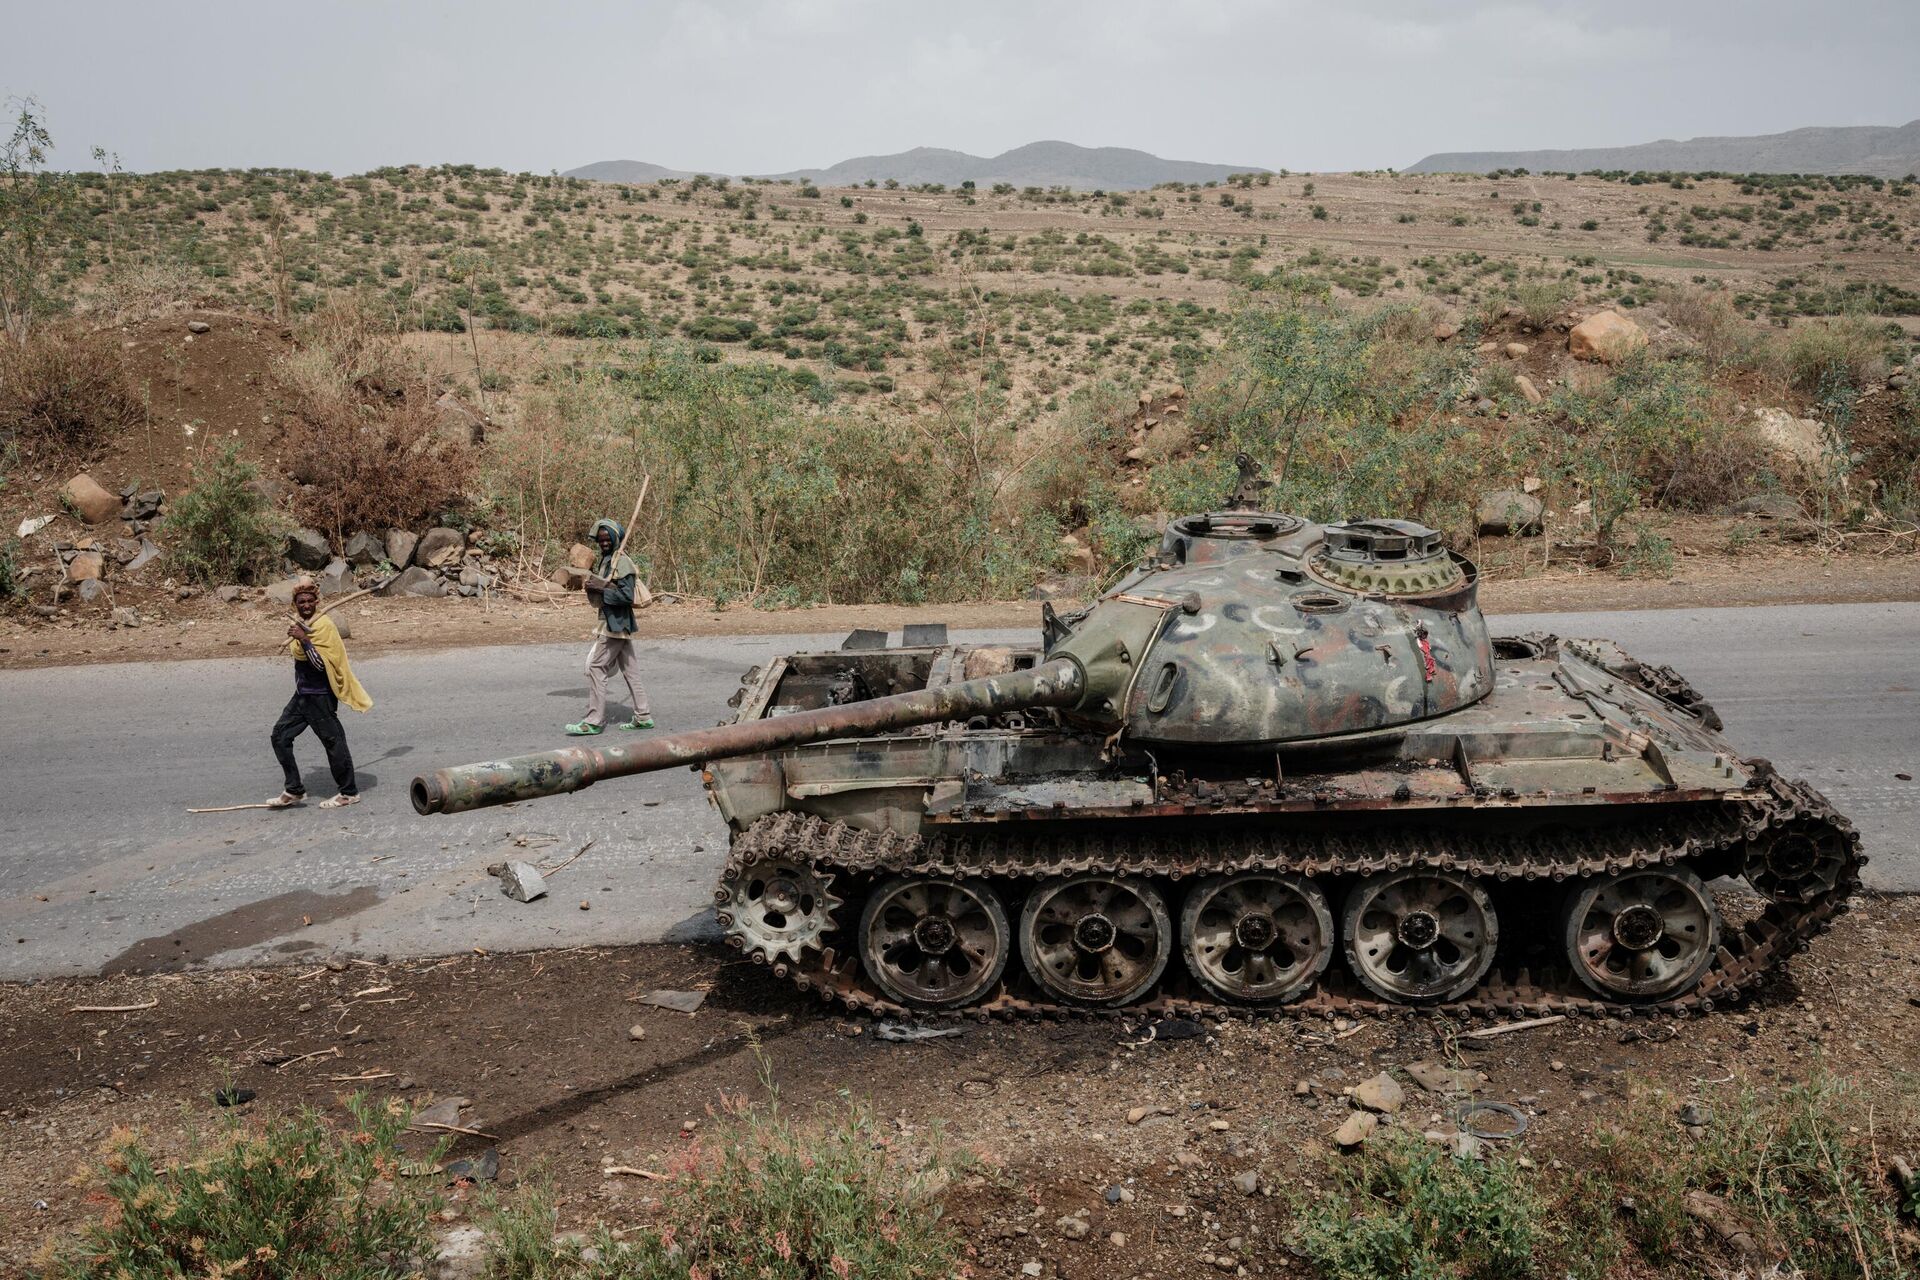 (FILES) In this file photo taken on June 20, 2021 Local farmers walk next to a tank of alledged Eritrean army that is abandoned along the road in Dansa, southwest of Mekele in Tigray region, Ethiopia. - Sputnik International, 1920, 25.08.2022